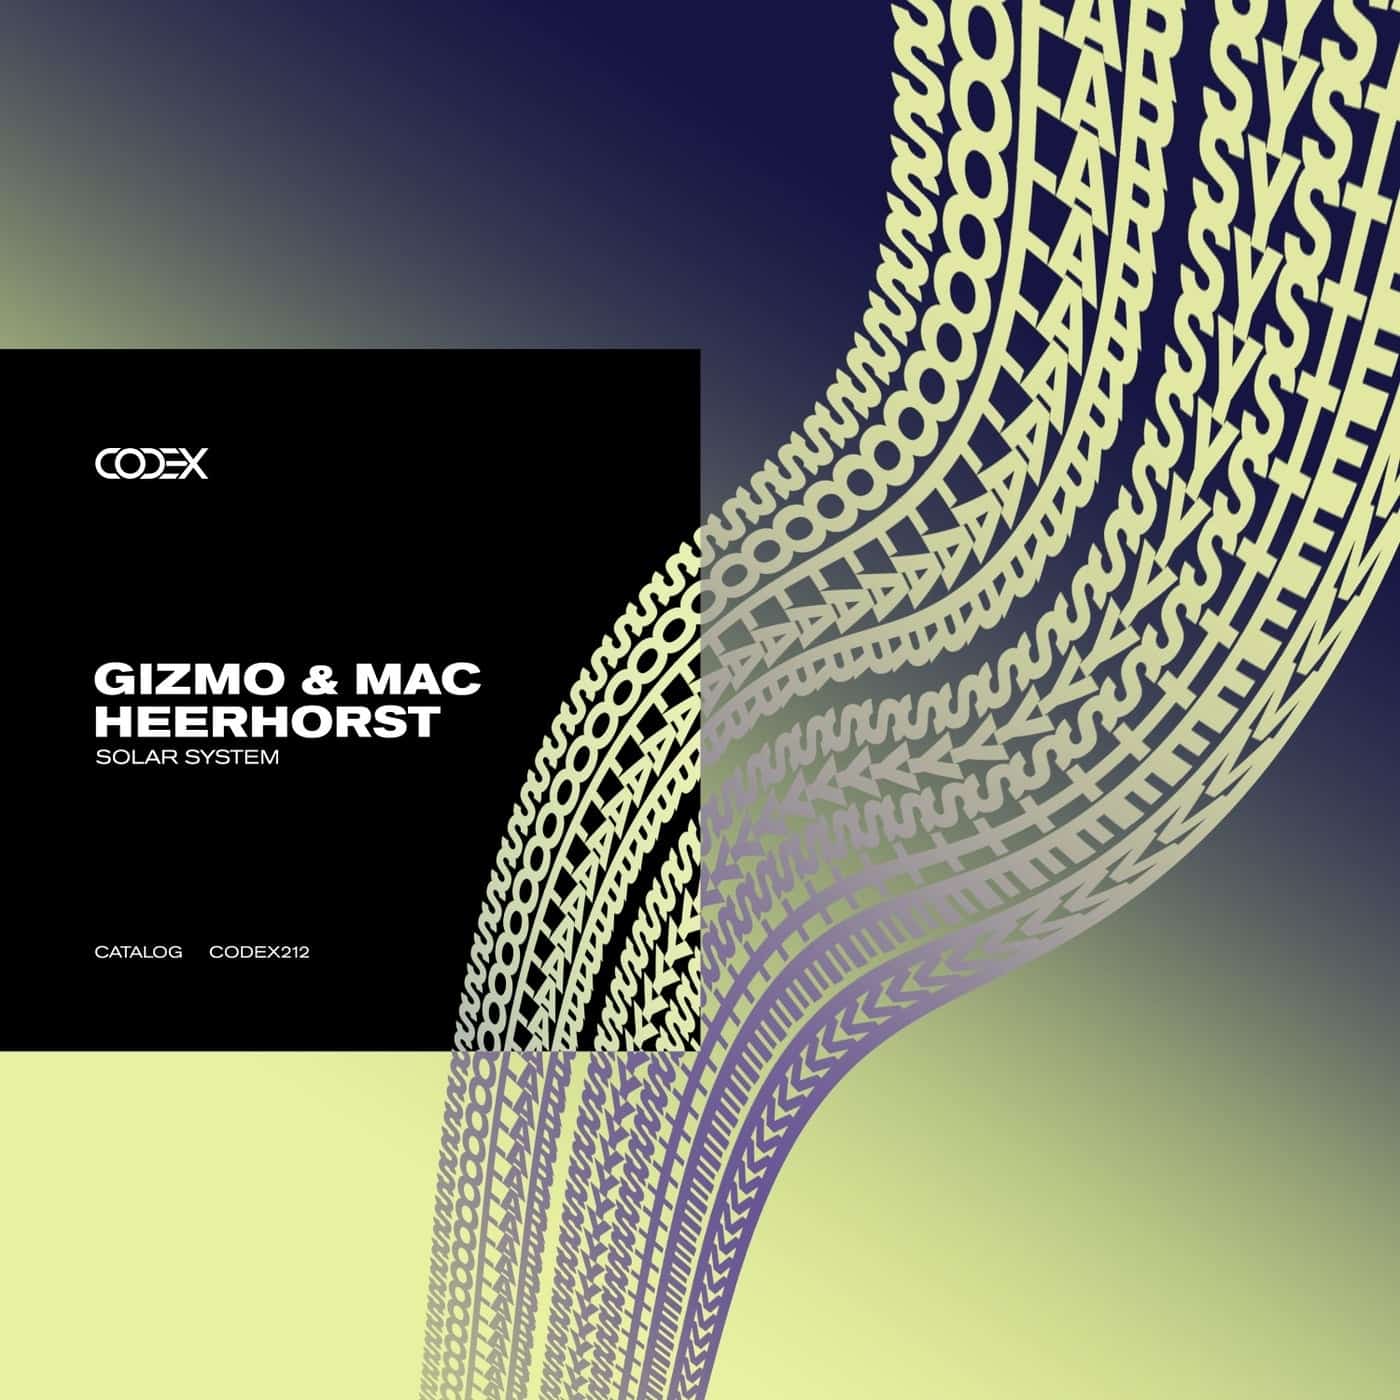 image cover: Solar System by Gizmo & Mac on Codex Recordings